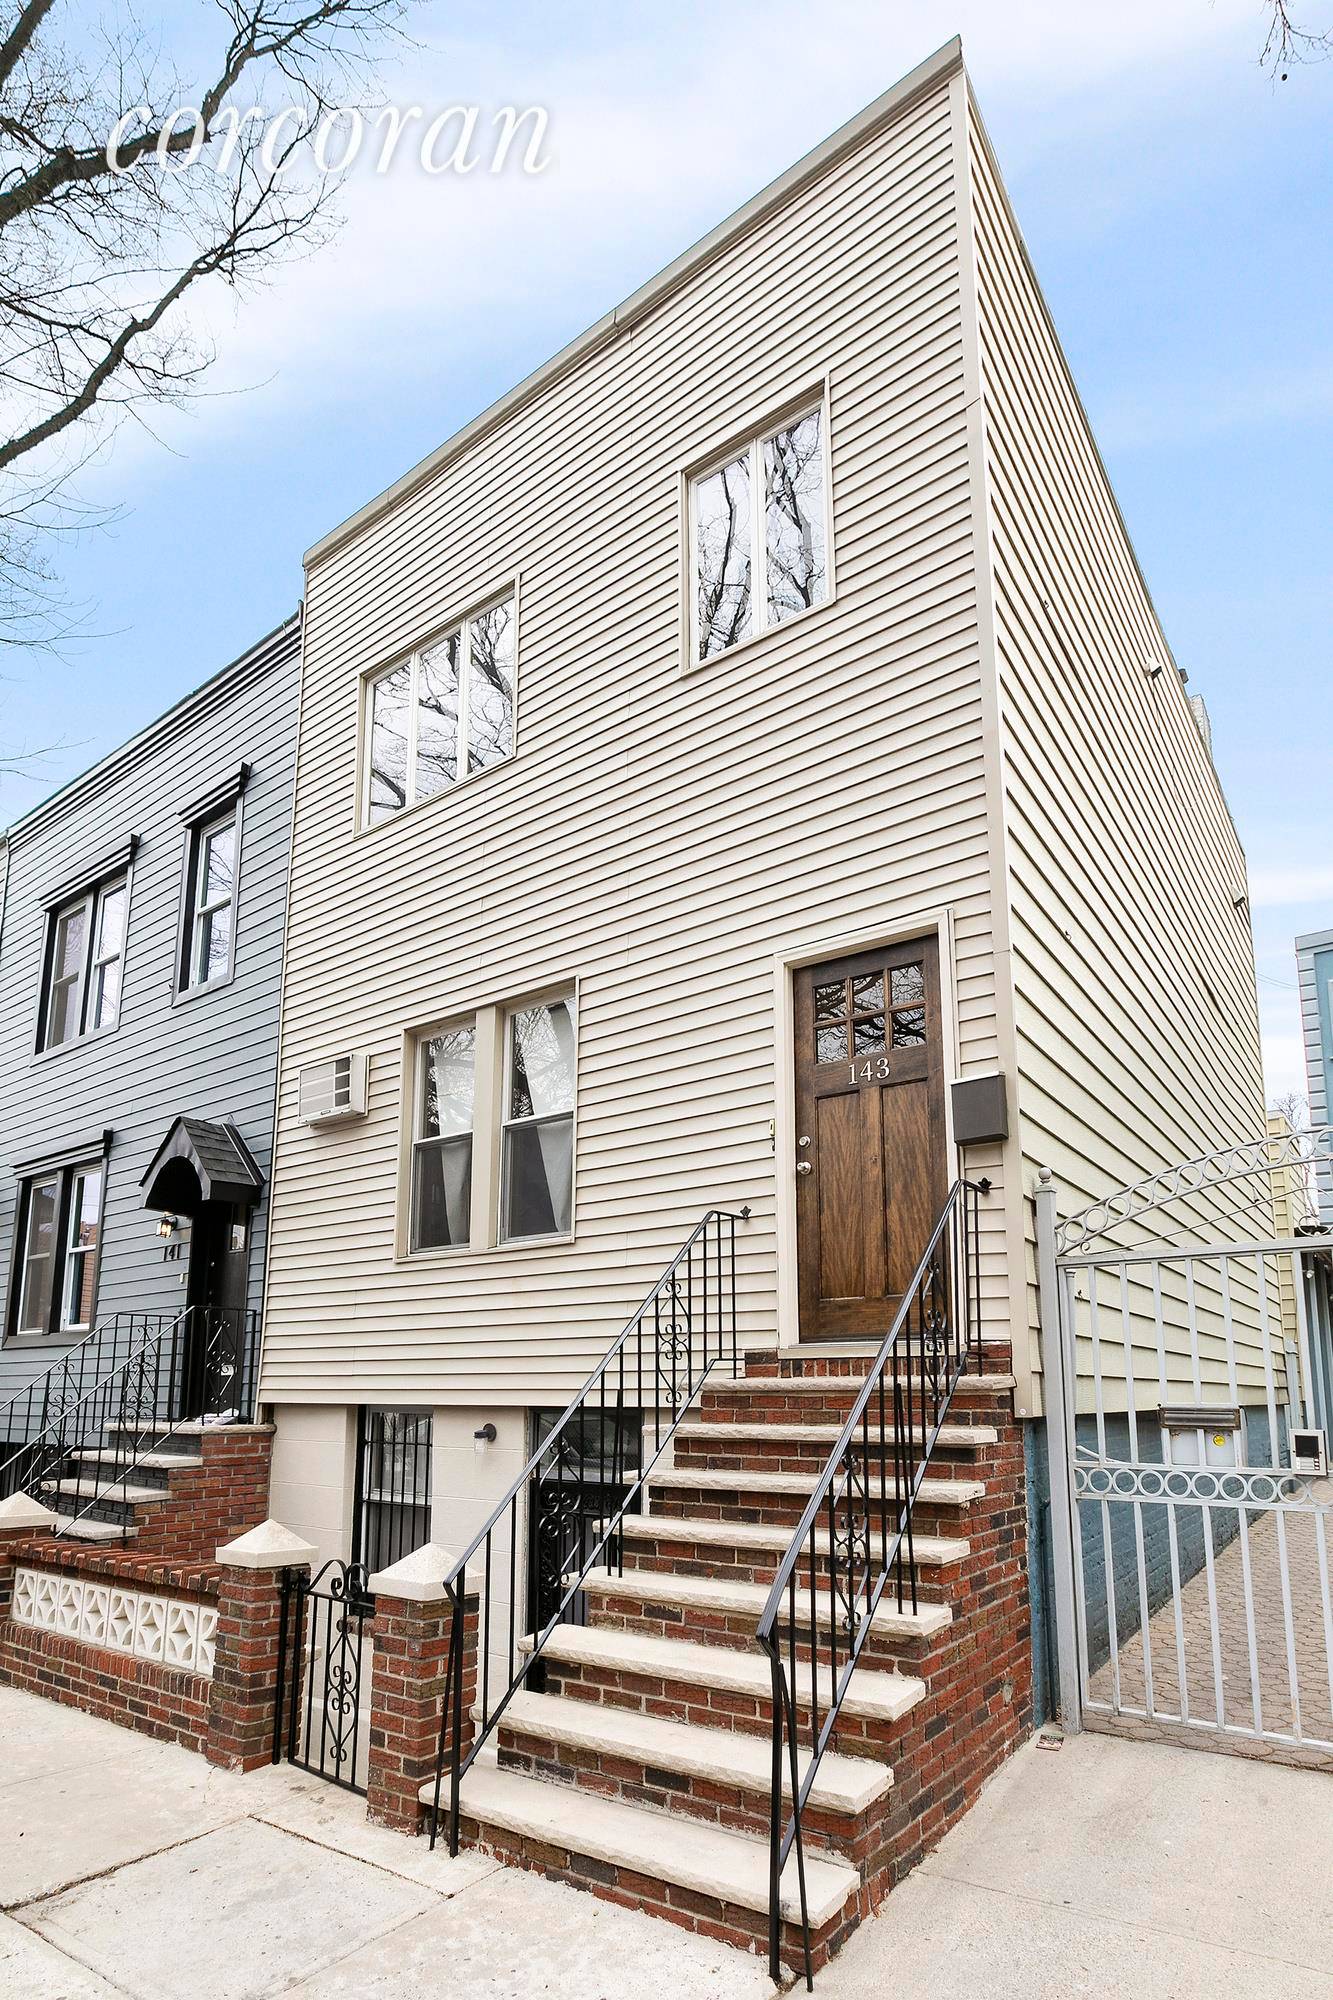 The Perfect Williamsburg Home or Investment Opportunity.